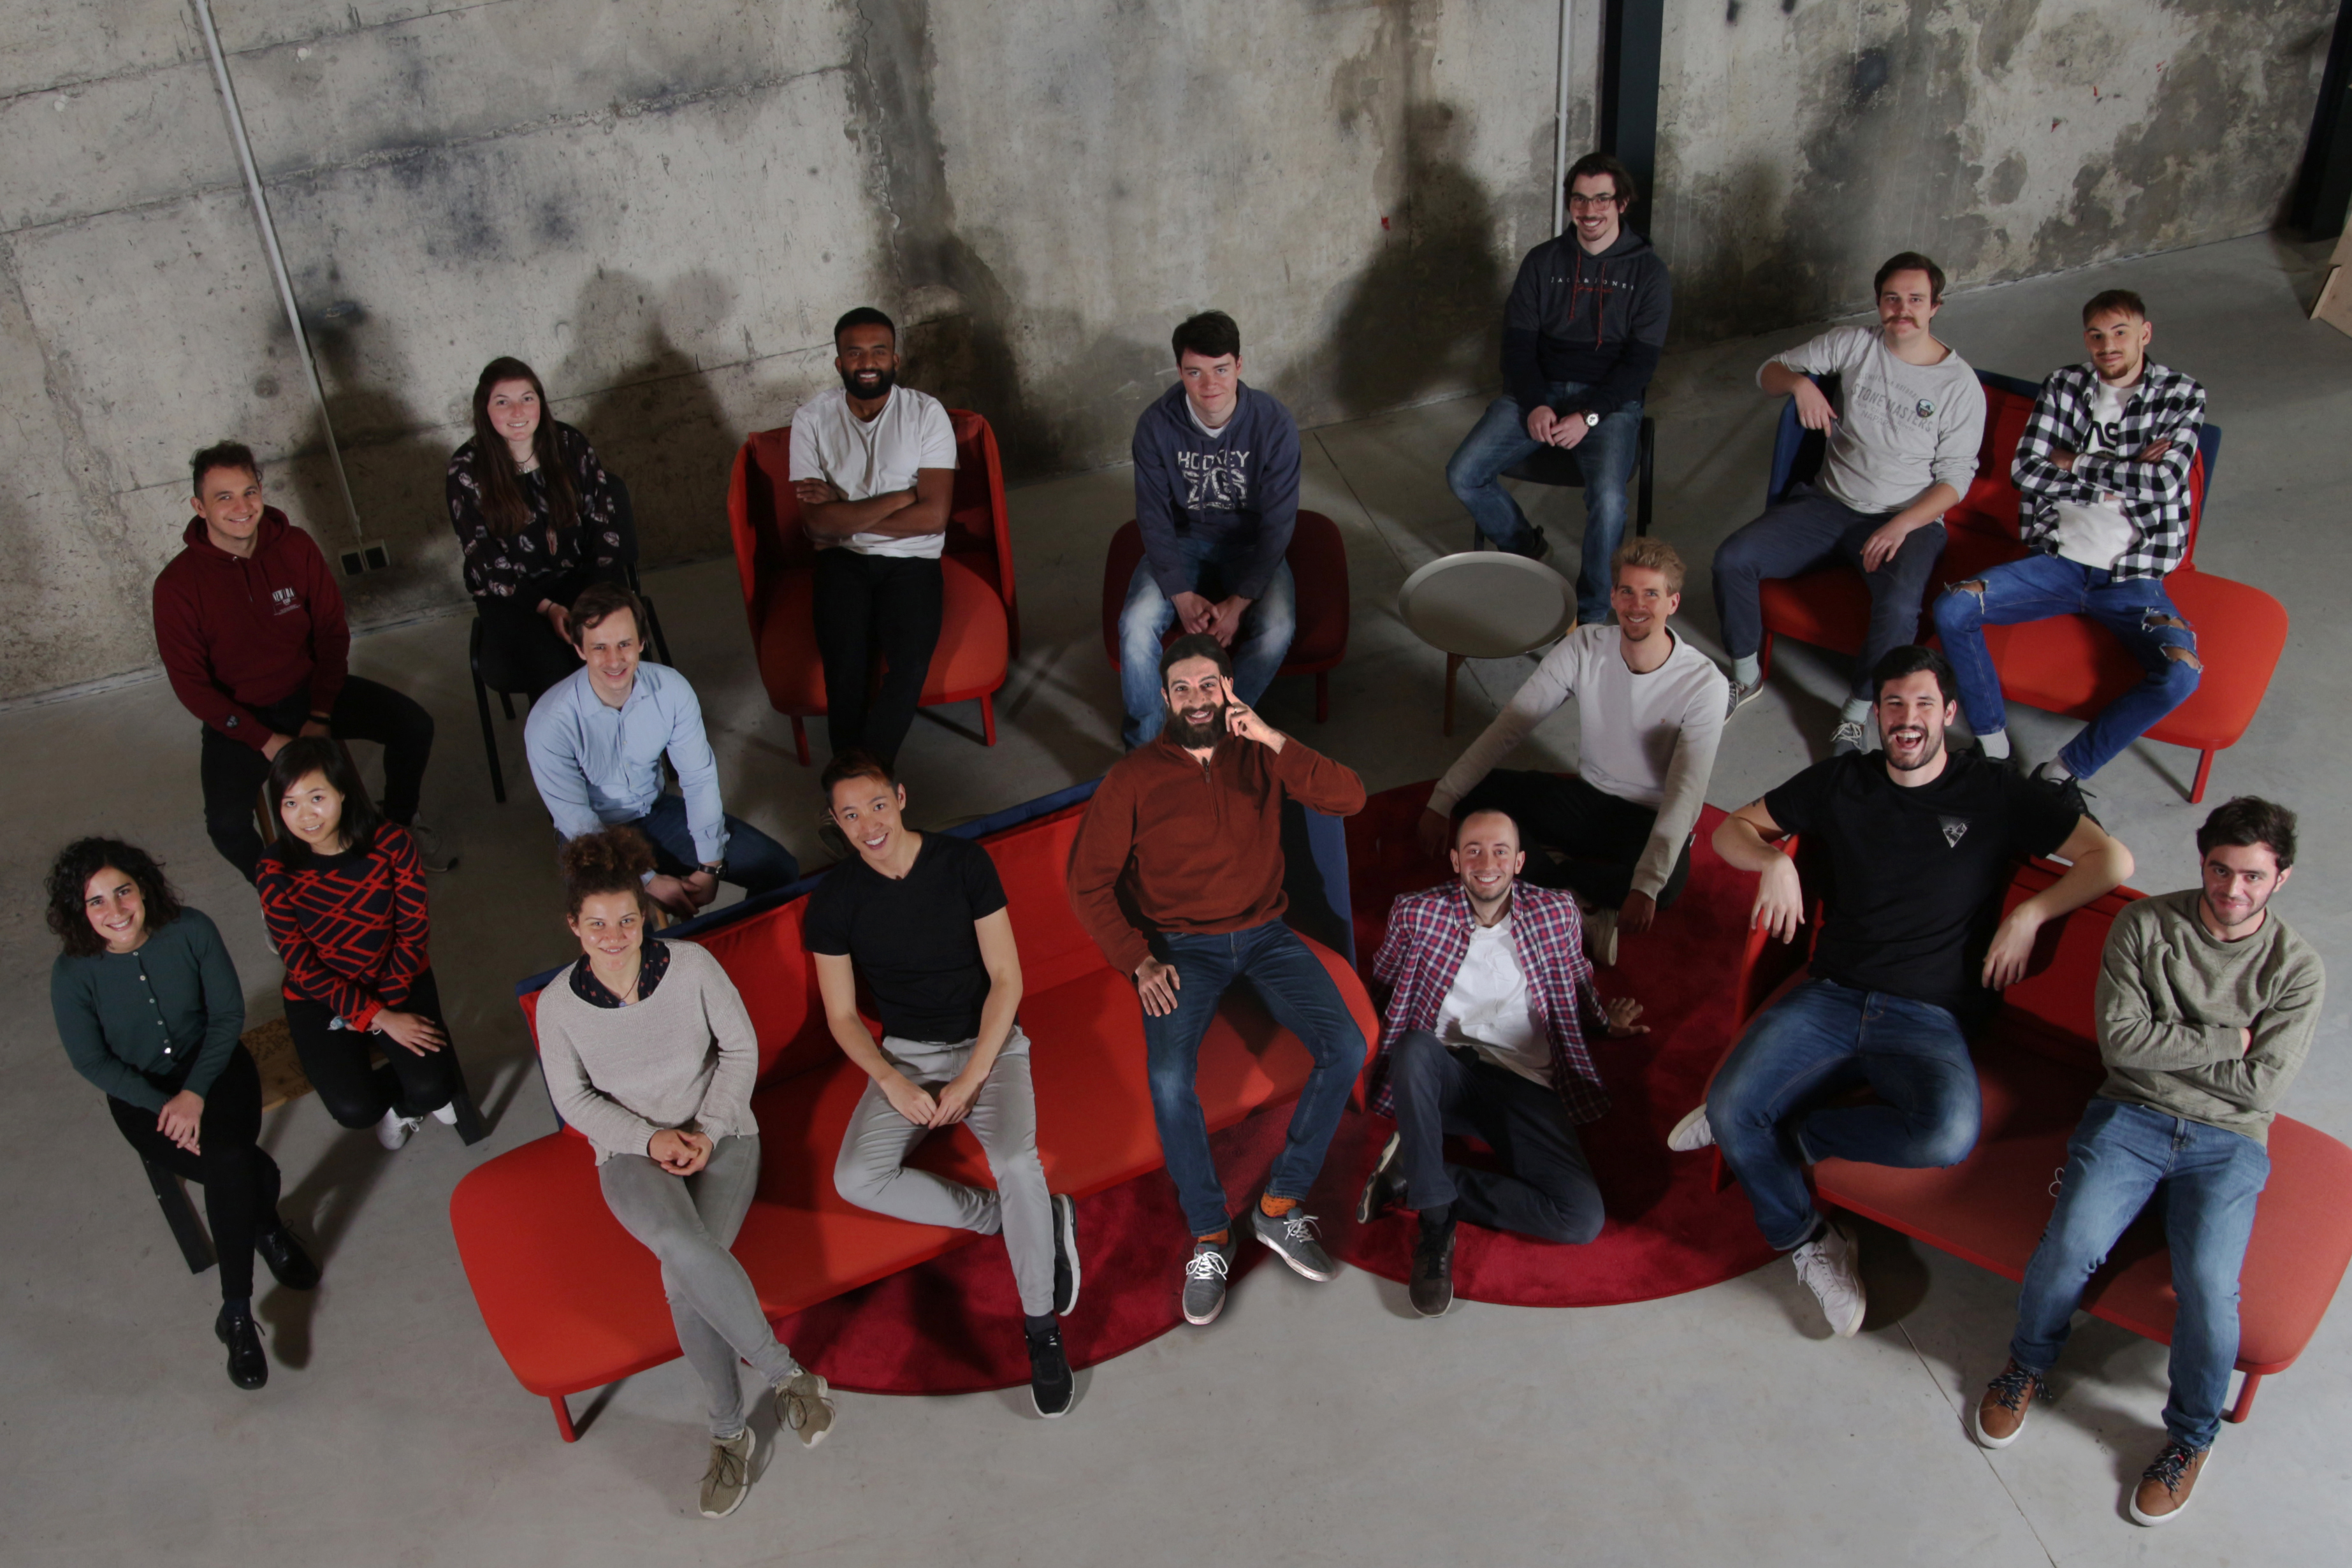 Group photo of Alpha-Protein GmbH: 17 people sit on red, cushioned benches and armchairs in front of an exposed concrete wall.